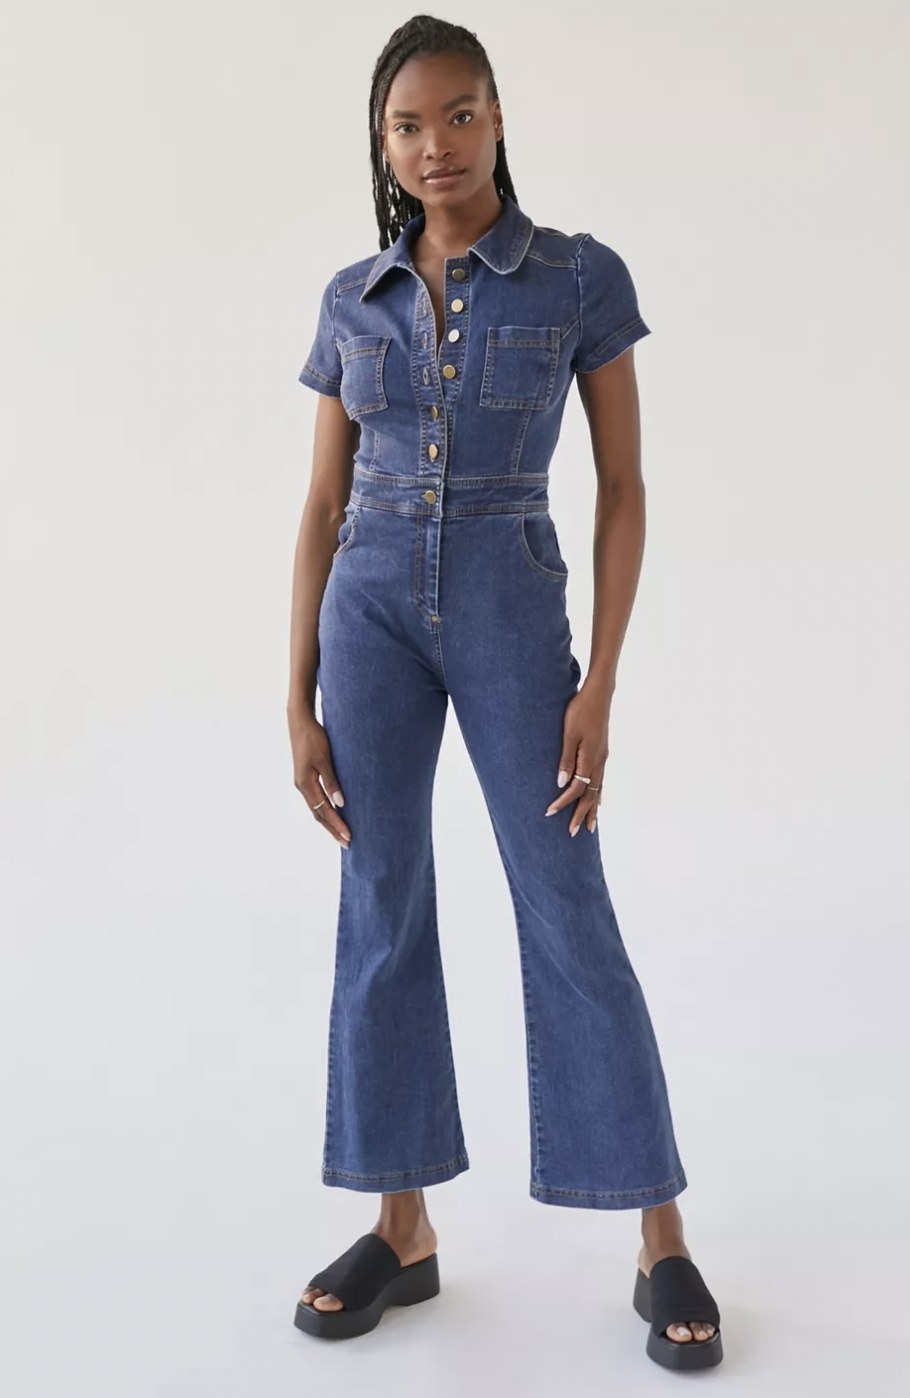 Model standing in the blue jumpsuit